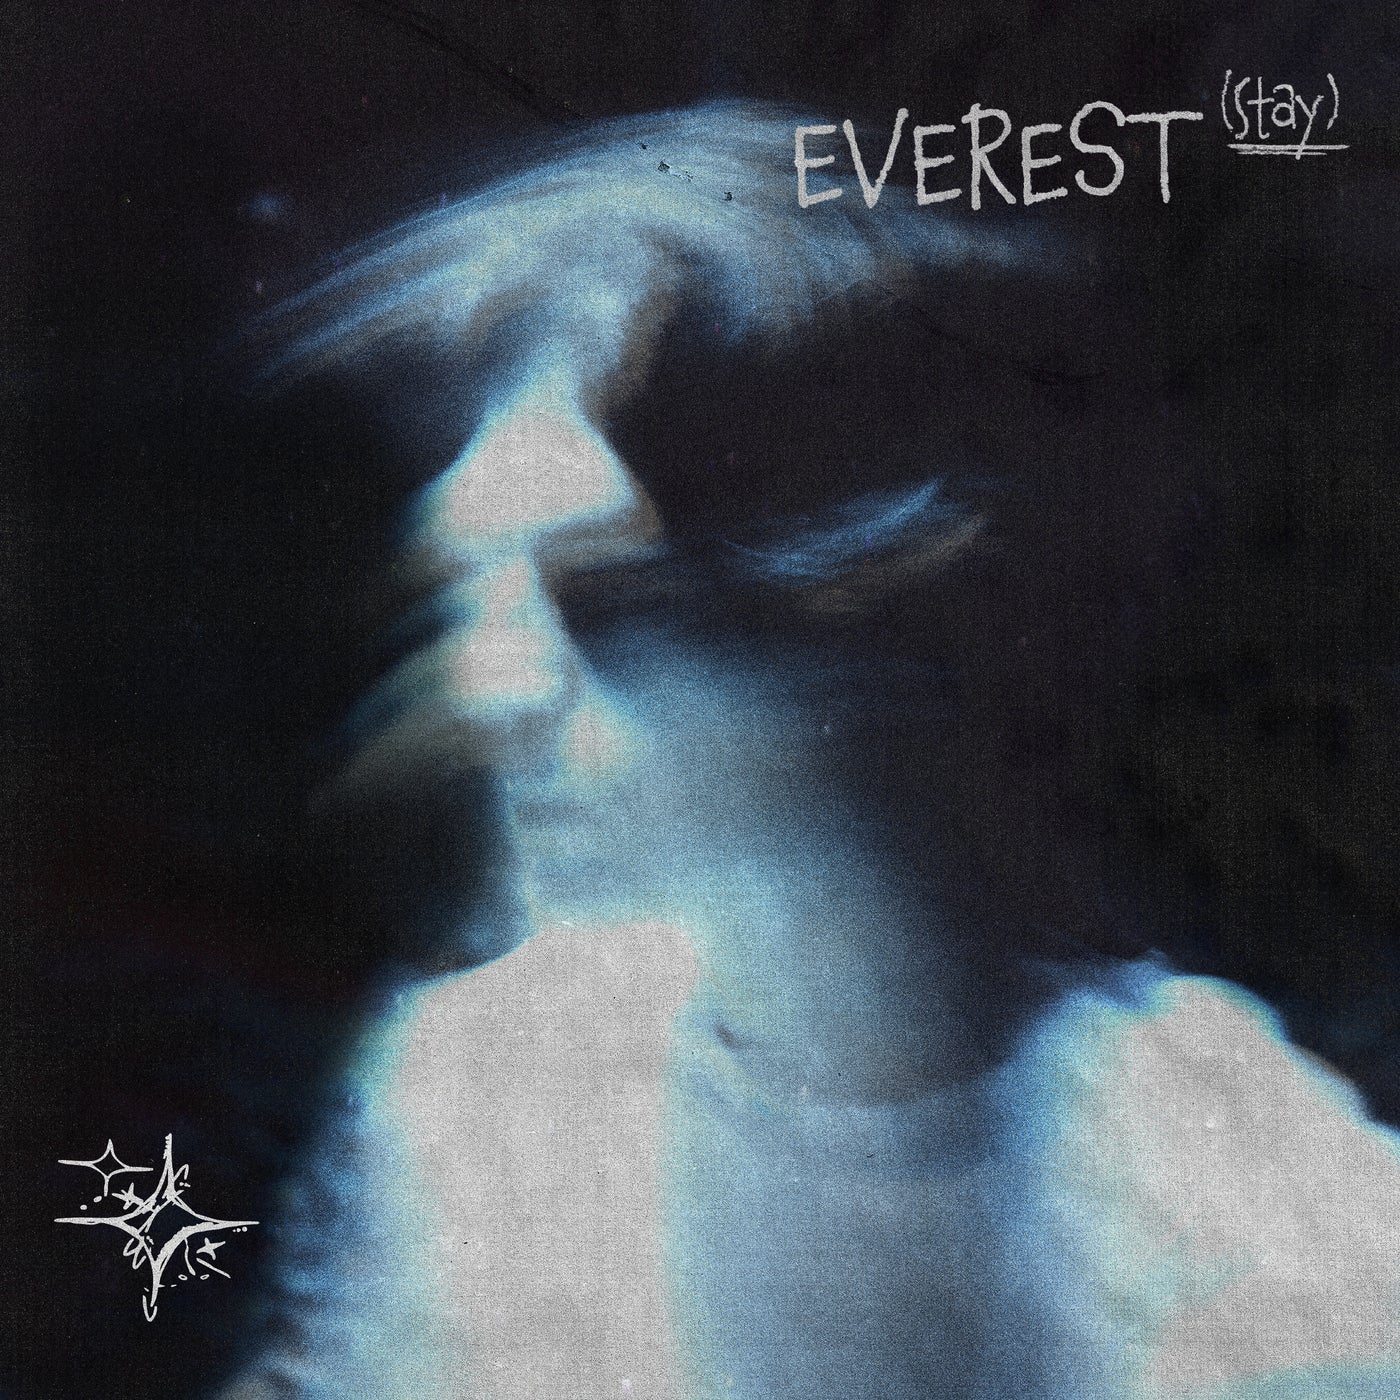 Everest (Stay)